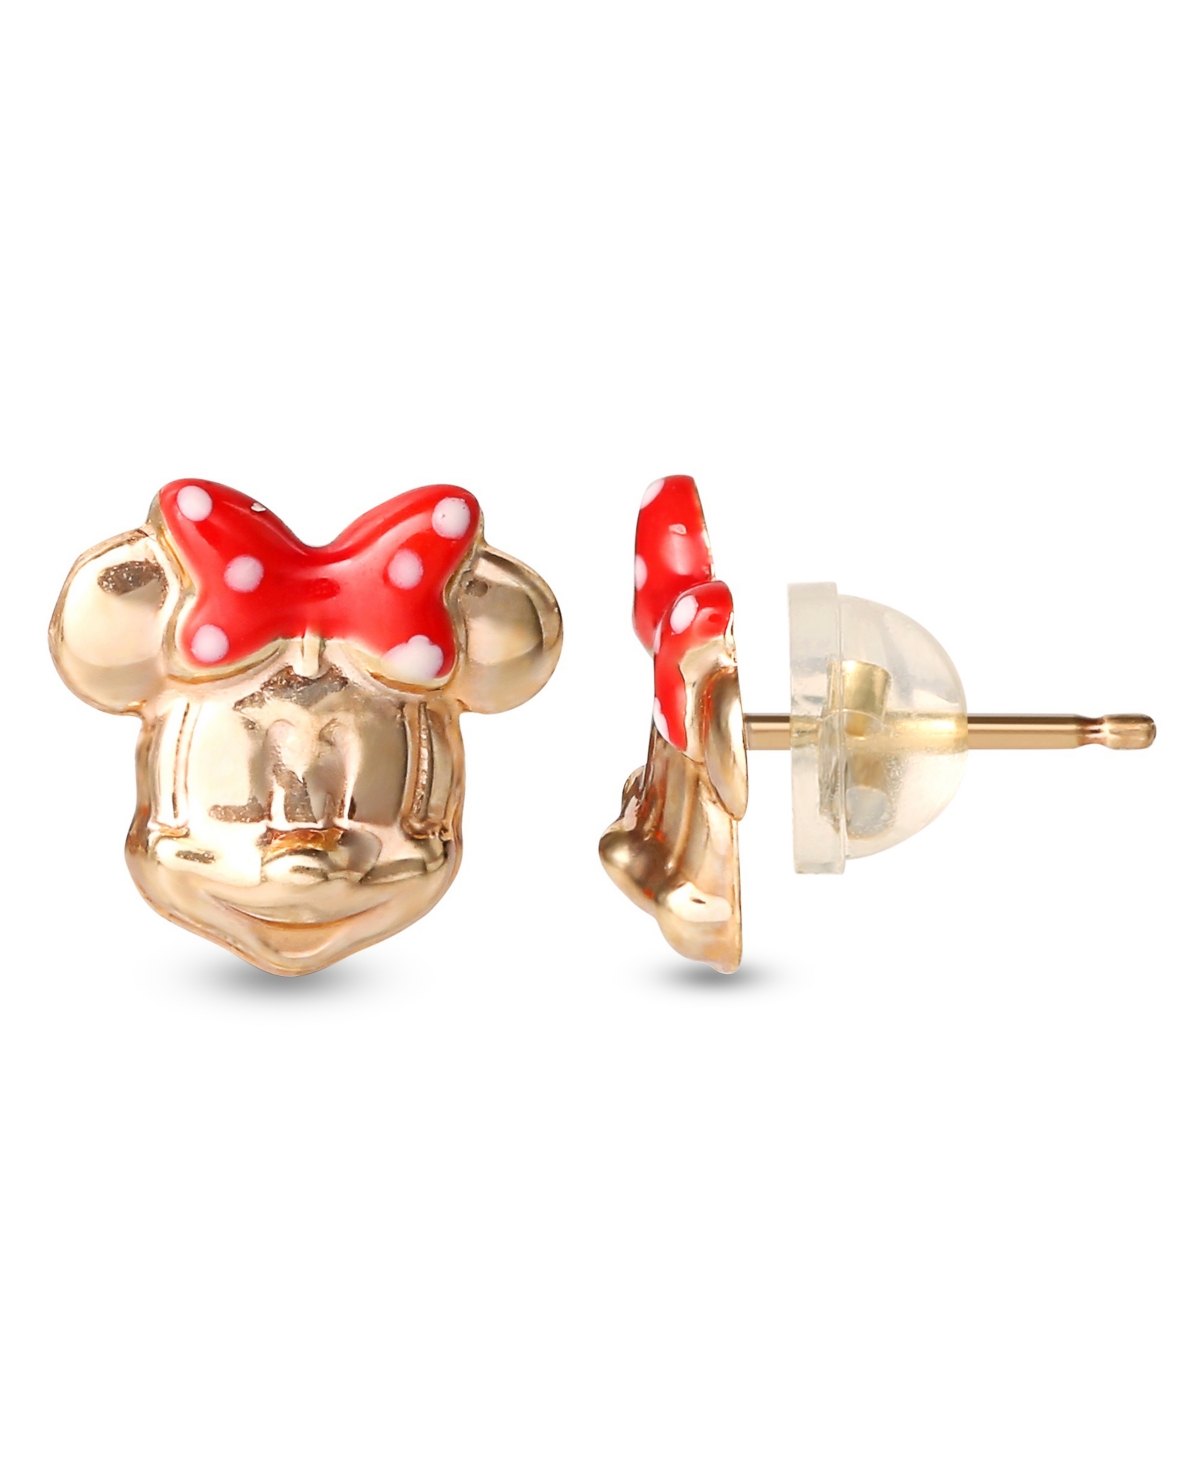 DISNEY CHILDREN'S MINNIE MOUSE BOW STUD EARRINGS IN 14K GOLD